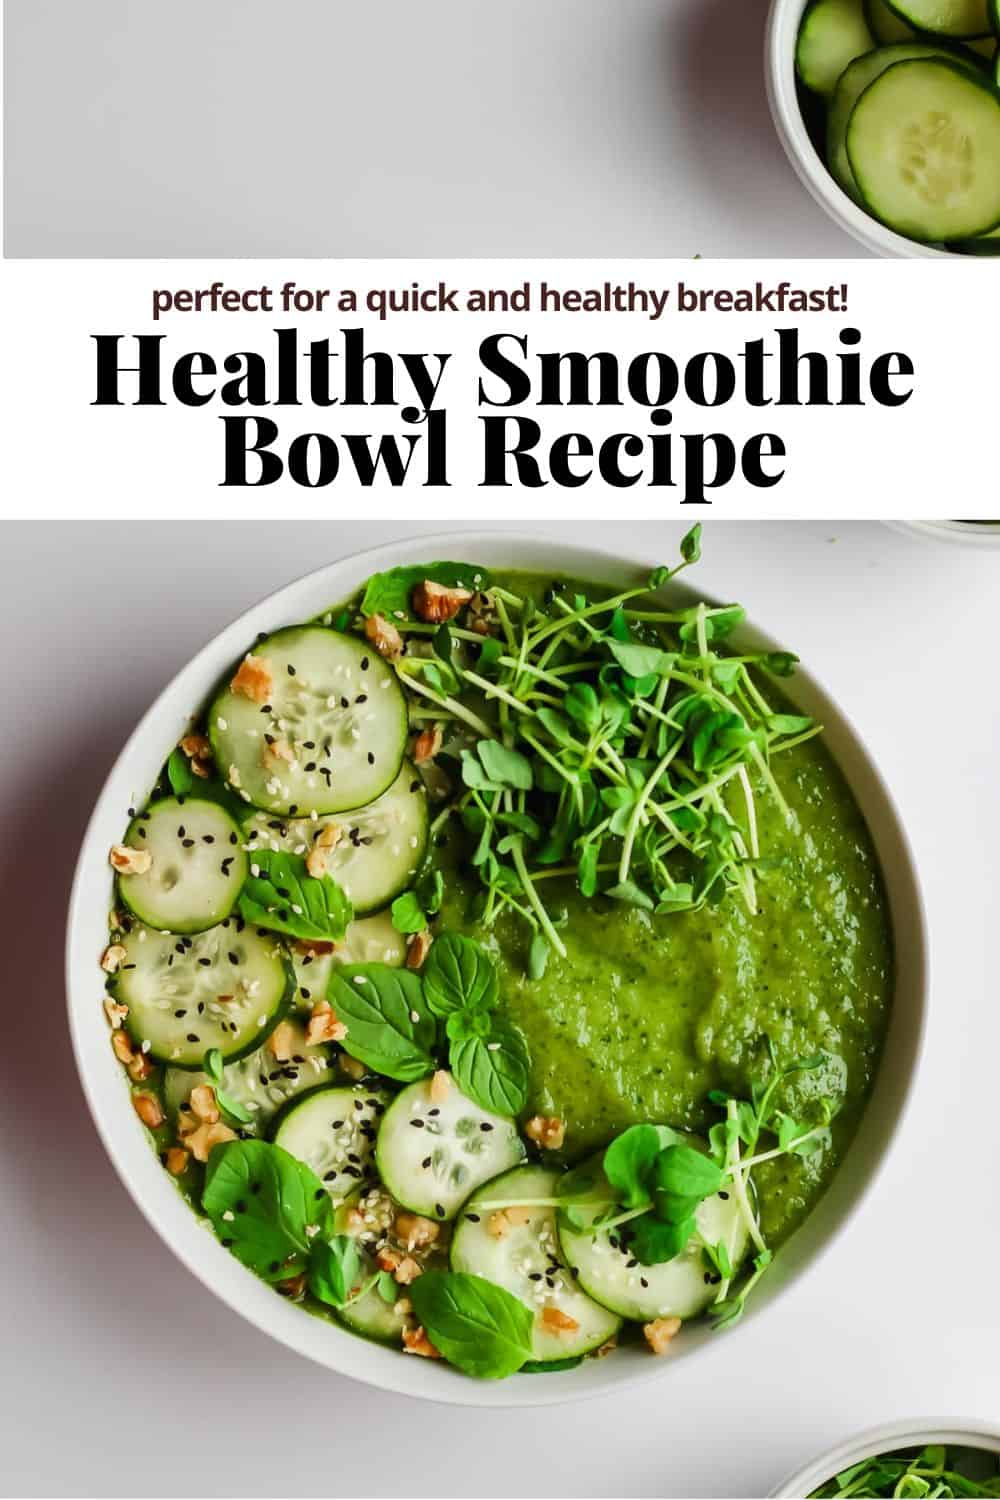 Pinterest image for a healthy green smoothie bowl.